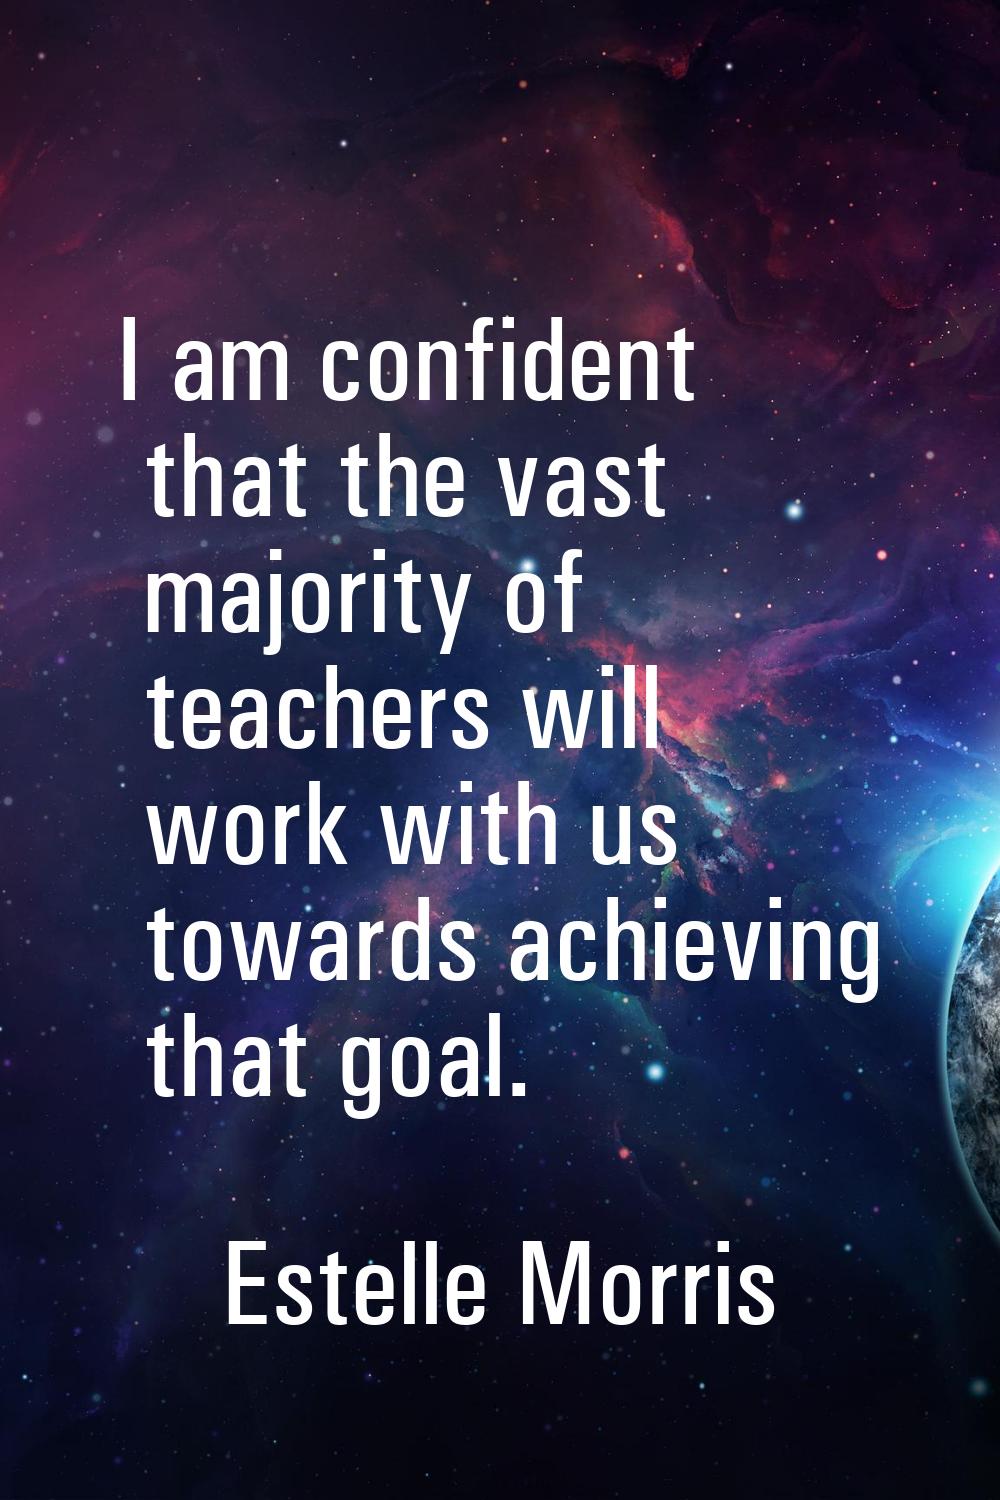 I am confident that the vast majority of teachers will work with us towards achieving that goal.